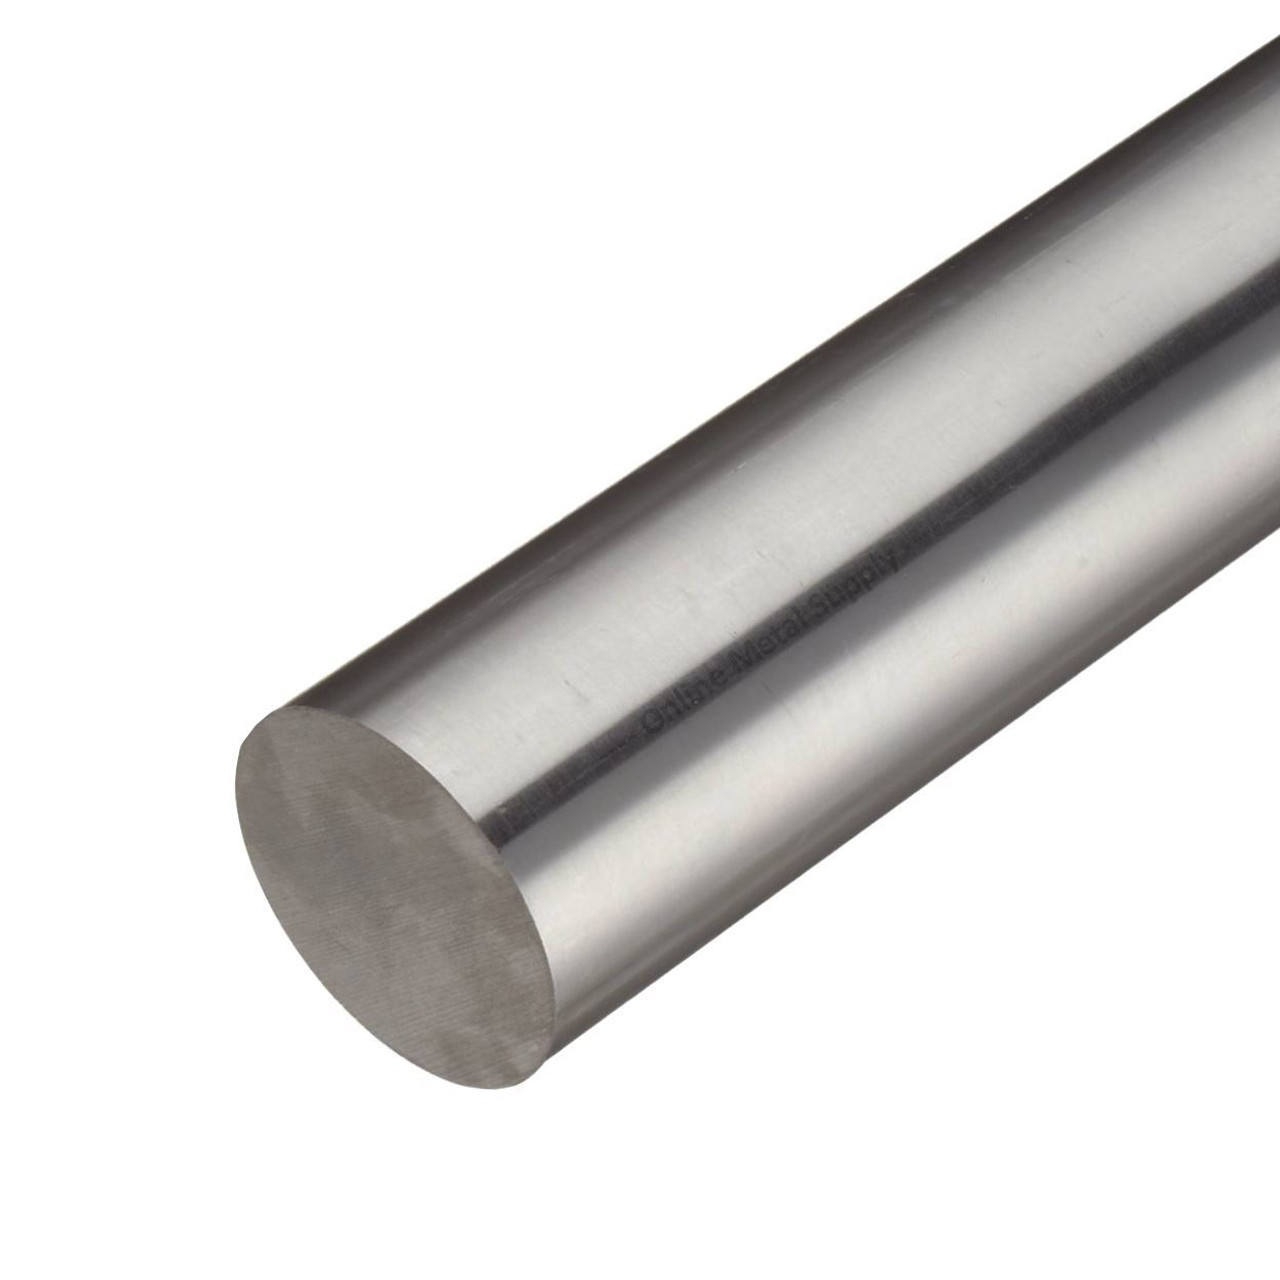 1.687 (1-11/16 inch) x 6 inches, 416 Stainless Steel Round Rod, Cold Finished